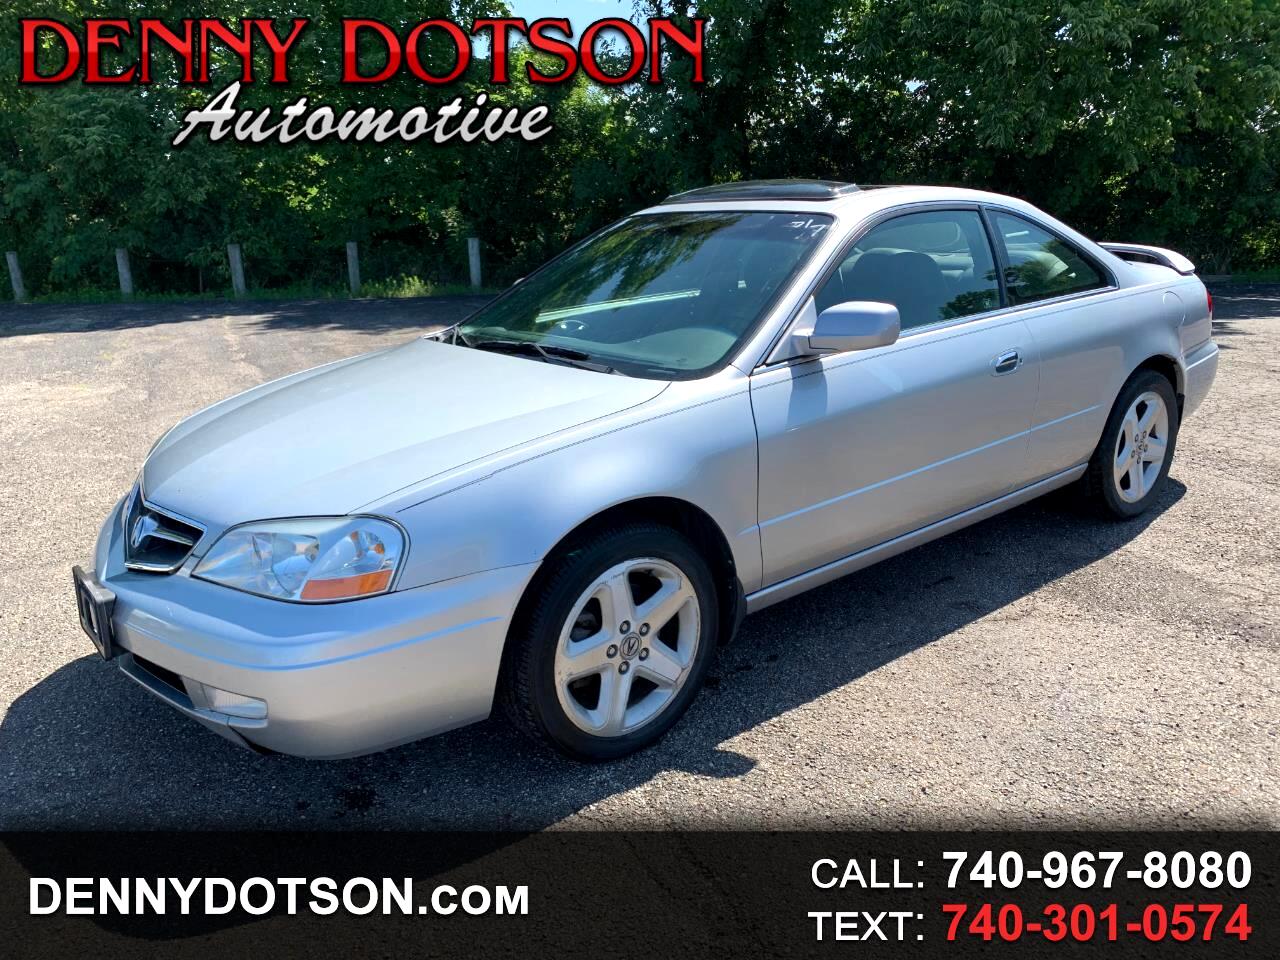 Acura CL 2dr Cpe 3.2L Type S 2002